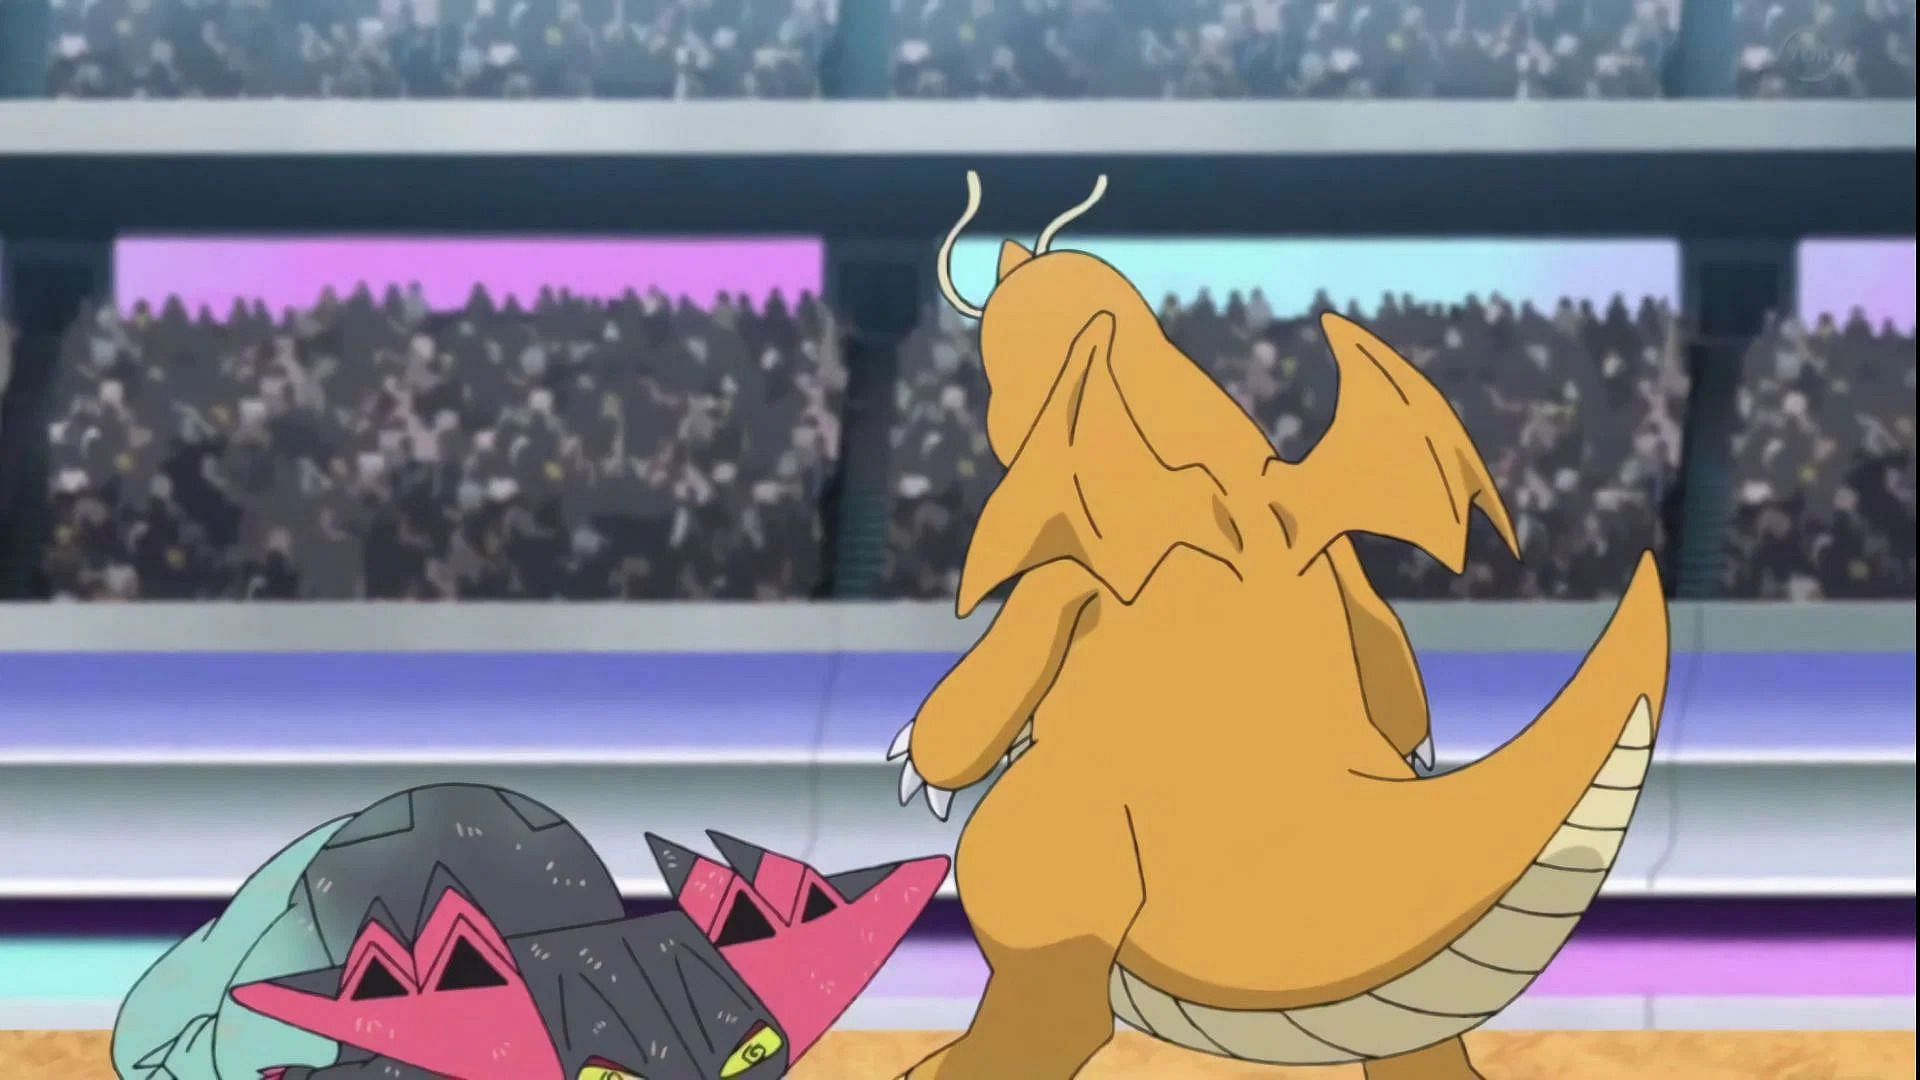 Will Dragonite keep winning in Pokemon Journeys episode 131 (Image via OLM Incorporated)